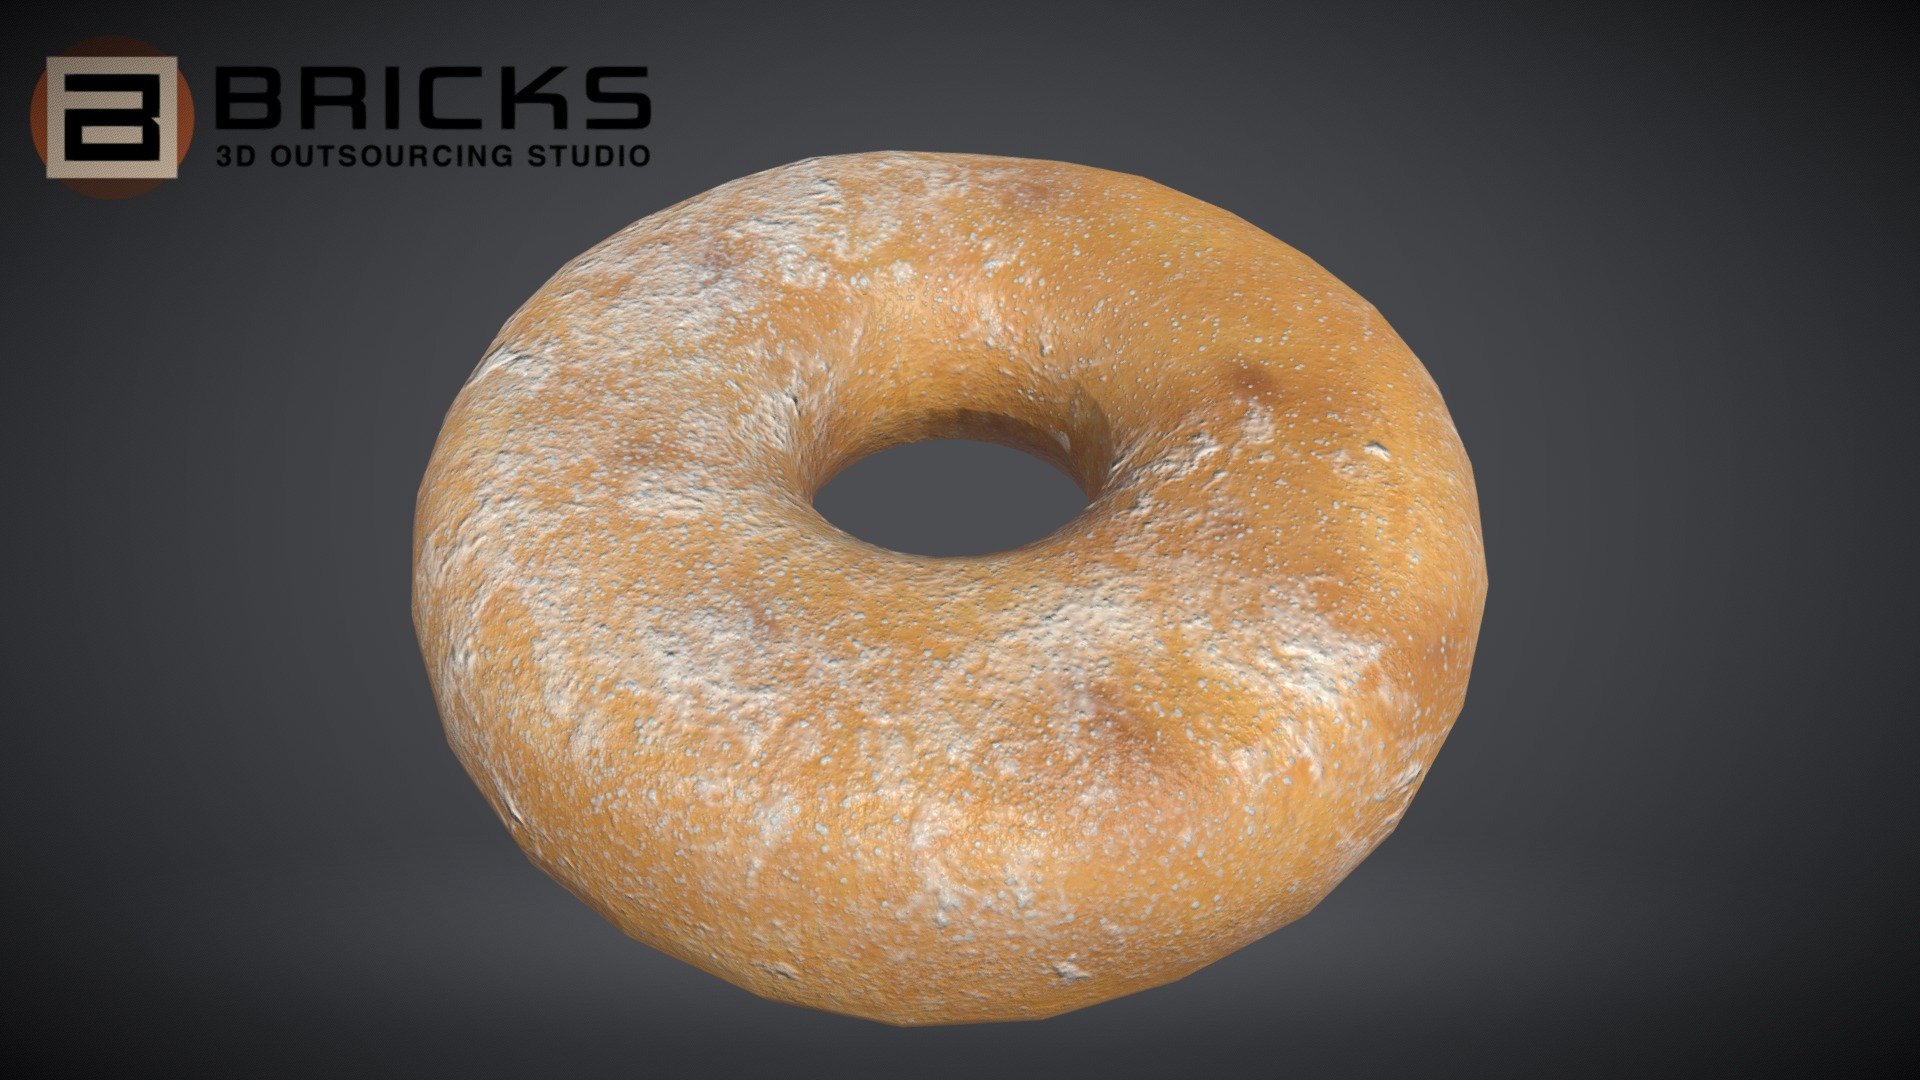 PBR Food Asset:
Doughnut
Polycount: 1120
Vertex count: 660
Texture Size: 2048px x 2048px
Normal: OpenGL

If you need any adjust in file please contact us: team@bricks3dstudio.com

Hire us: tringuyen@bricks3dstudio.com
Here is us: https://www.bricks3dstudio.com/
        https://www.artstation.com/bricksstudio
        https://www.facebook.com/Bricks3dstudio/
        https://www.linkedin.com/in/bricks-studio-b10462252/ - Doughnut - Buy Royalty Free 3D model by Bricks Studio (@bricks3dstudio) 3d model